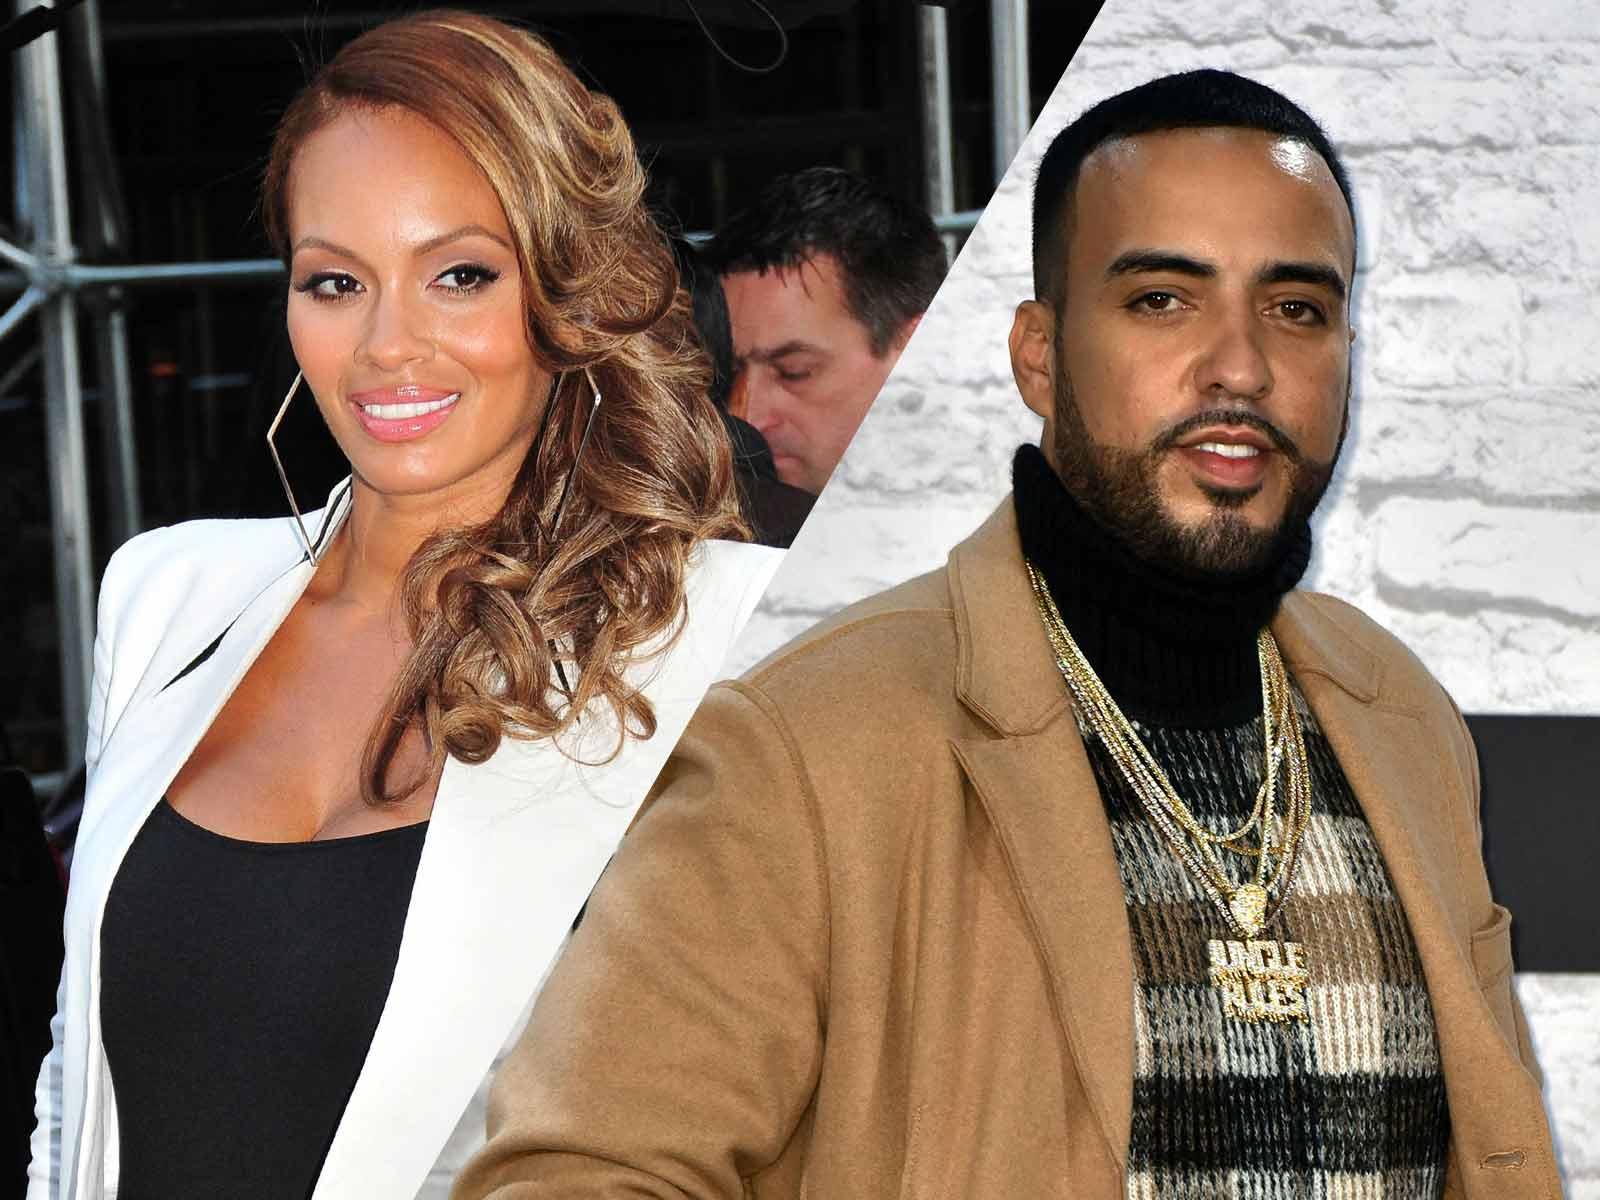 French Montana & ‘Basketball Wives’ Star Evelyn Lozada Are Officially Dating